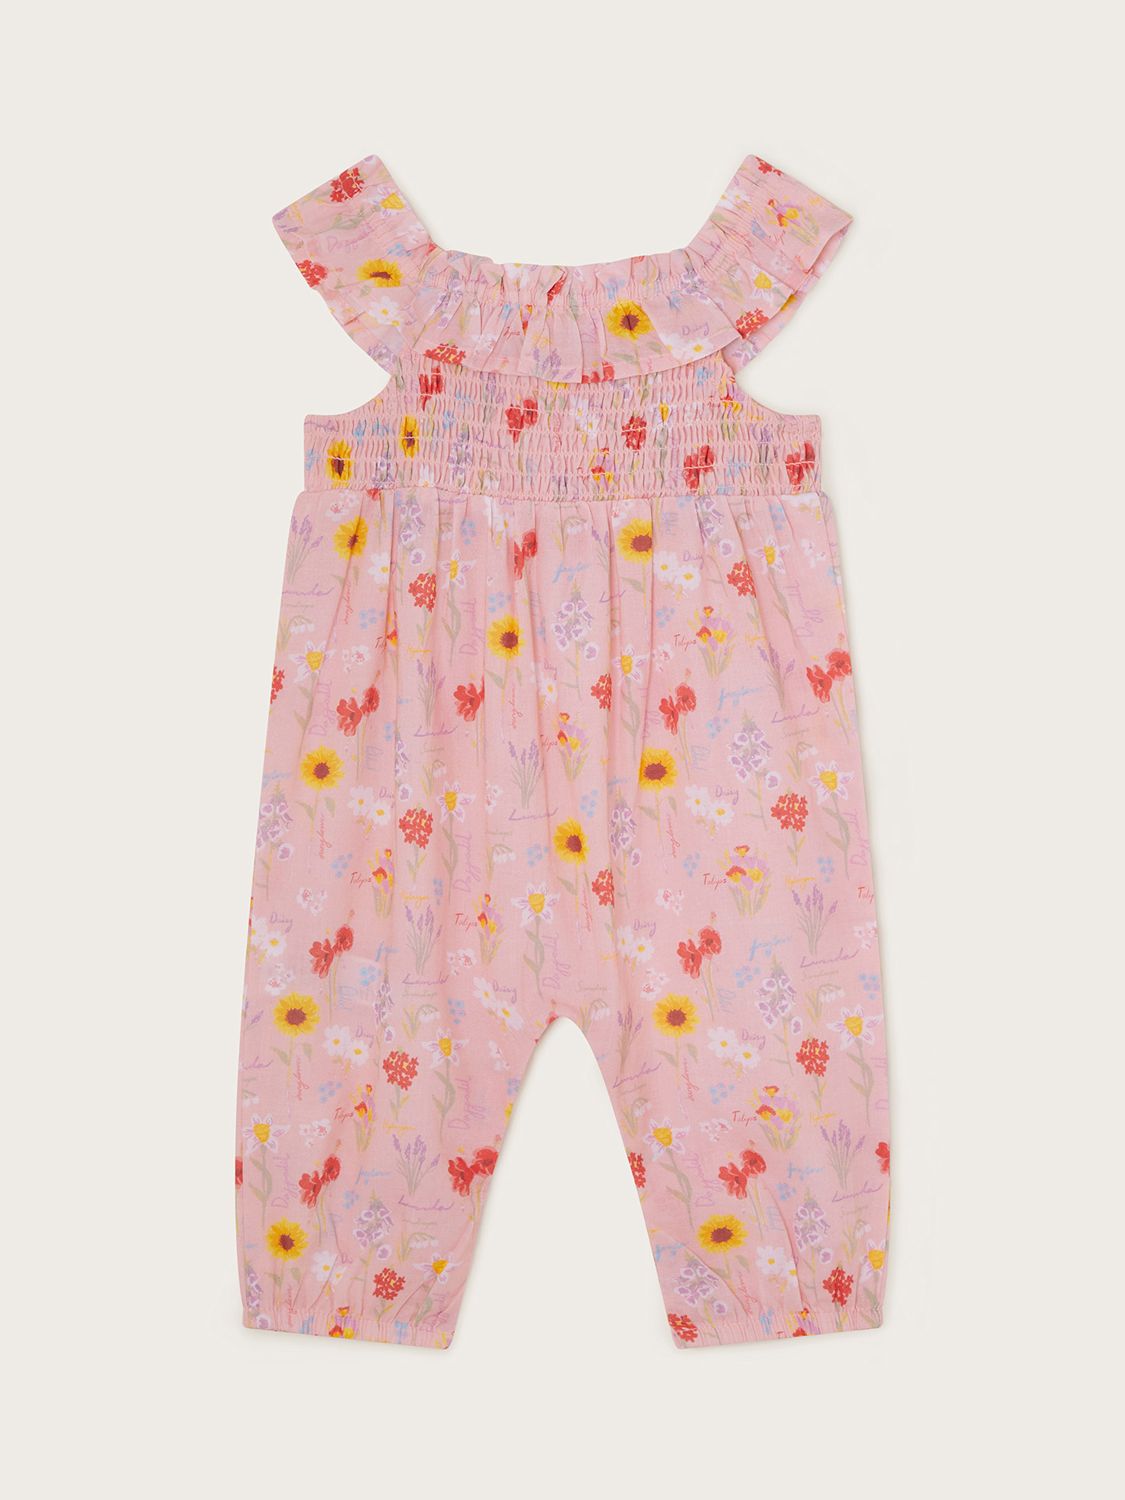 Monsoon Baby Sunflower Print Frill Neck Romper, Pale Pink, 0-3 months